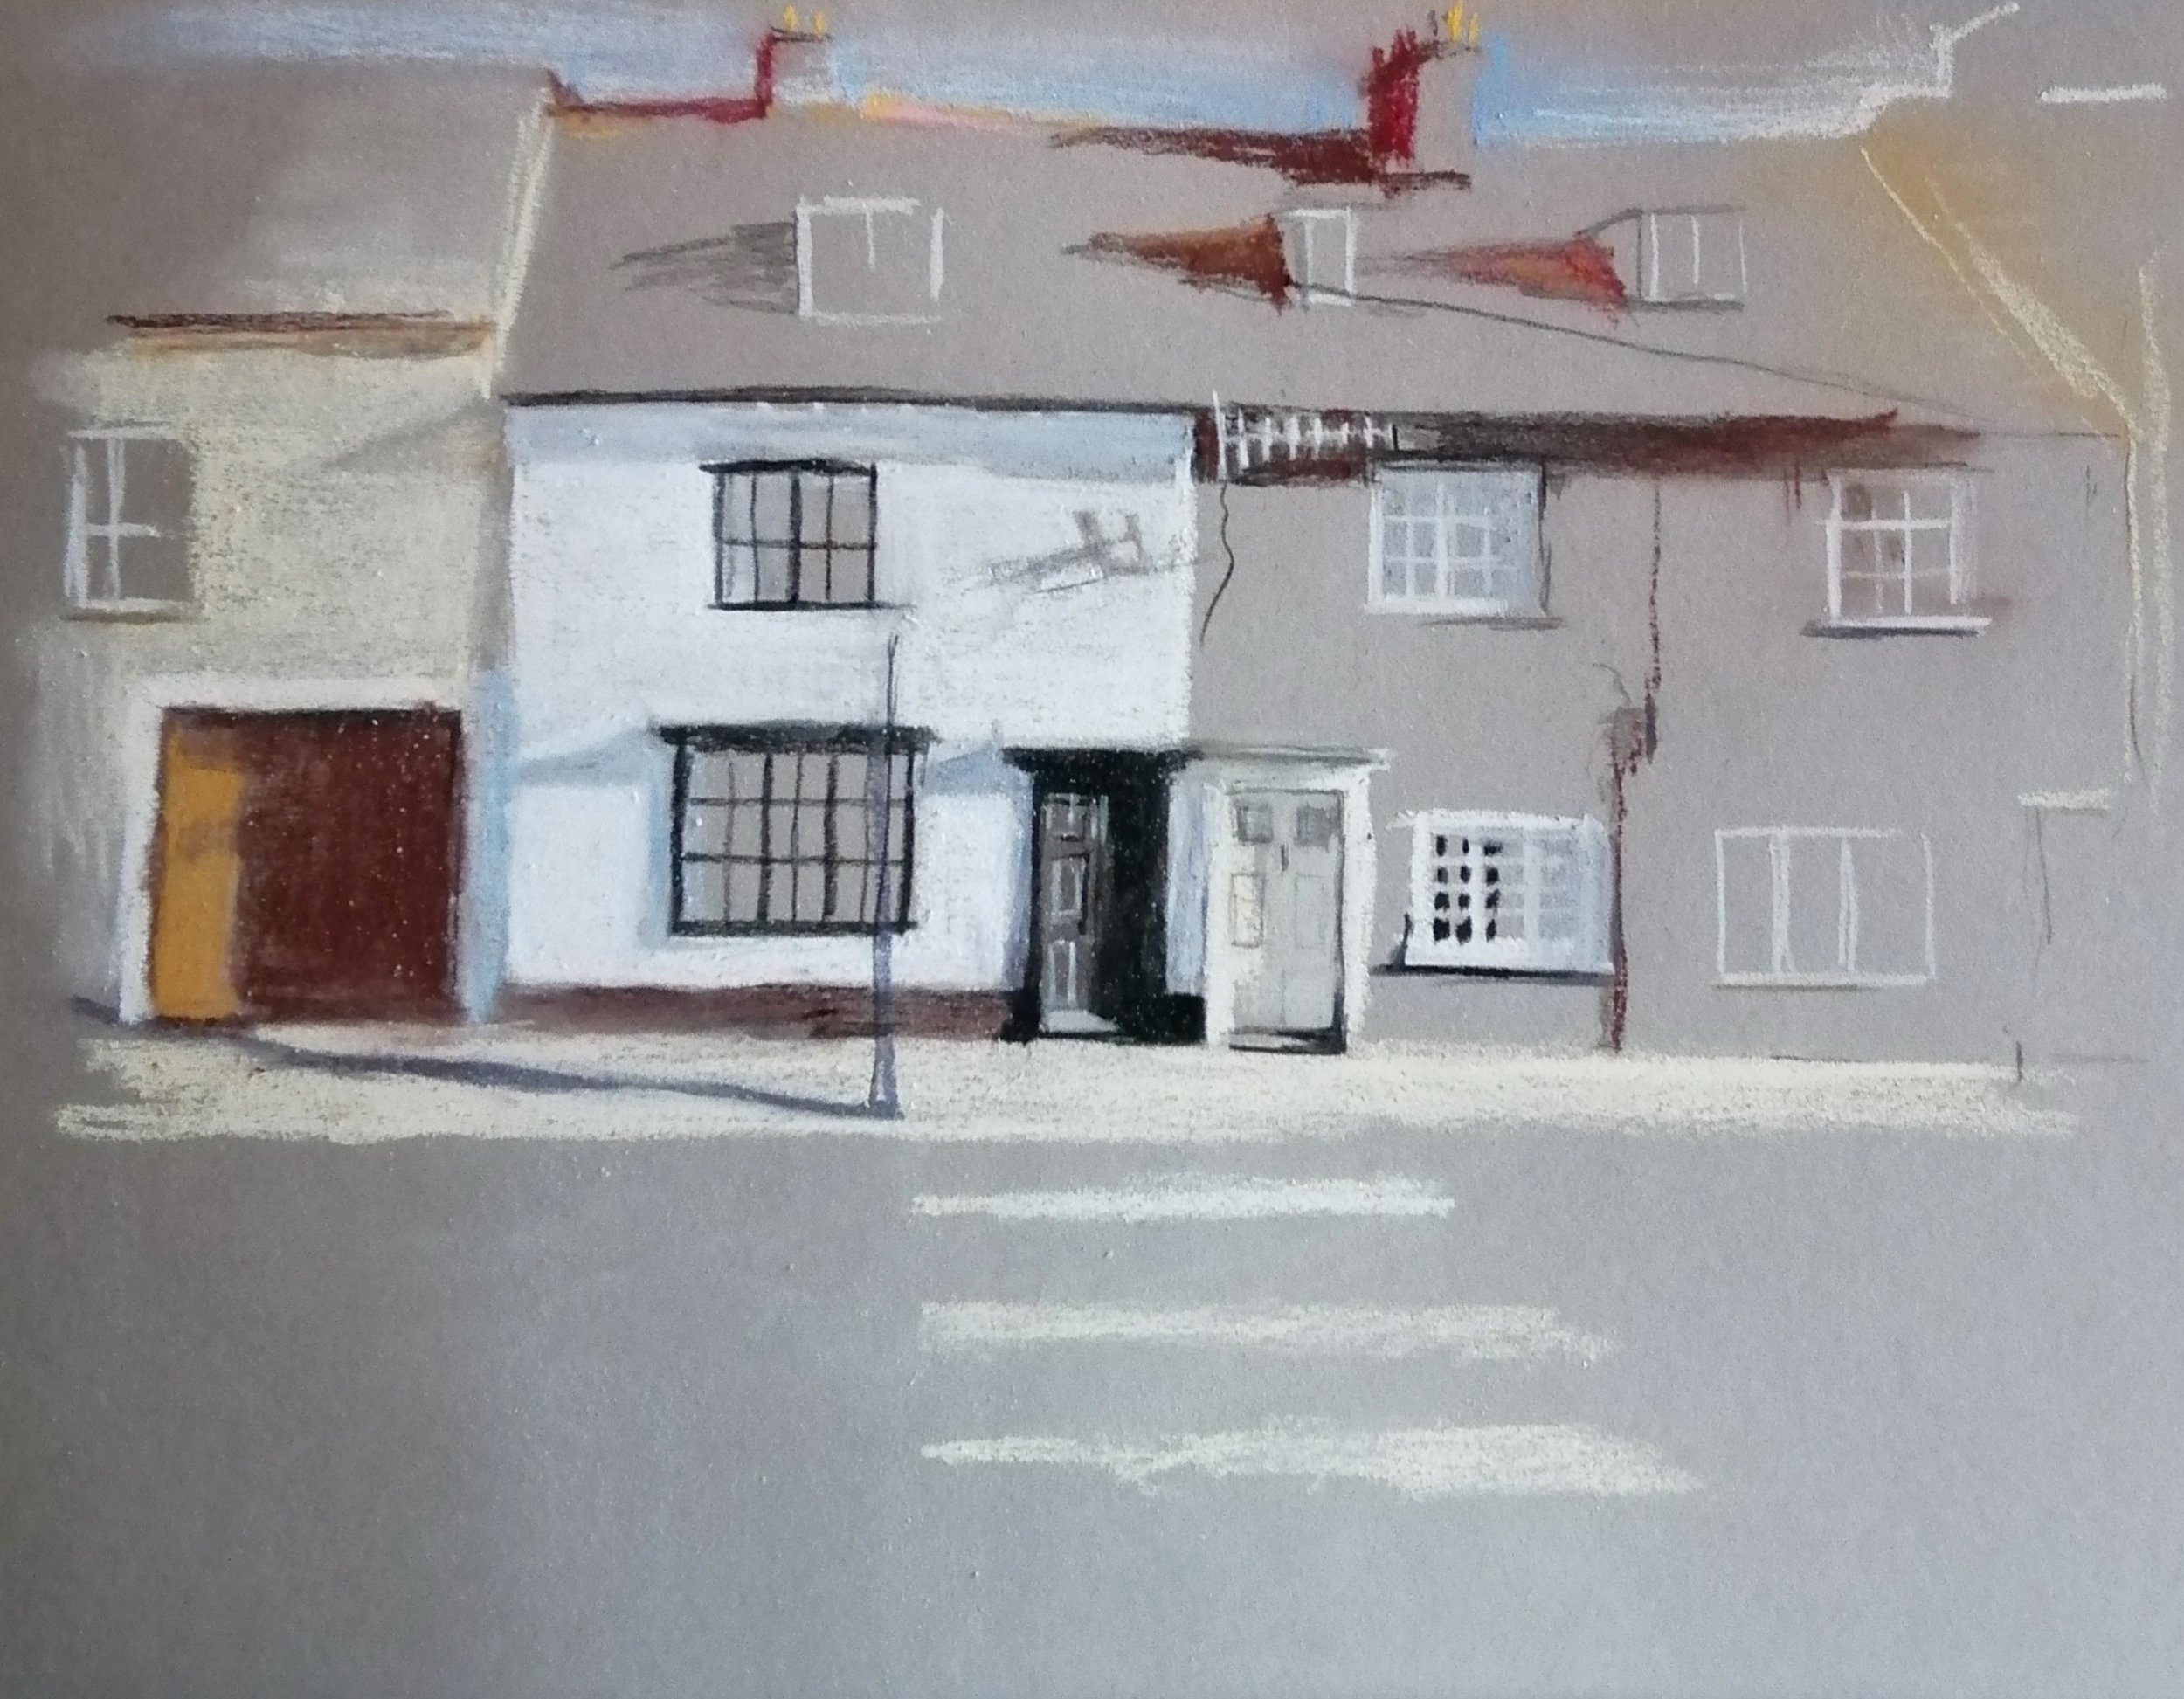  Houses  Pastel and pencil  not currently available  This pastel and pencil drawing has a sense of depth and three dimensions with the use of light and shadows, and the zebra crossing in the foreground gently leads the viewer towards the subject.. Th